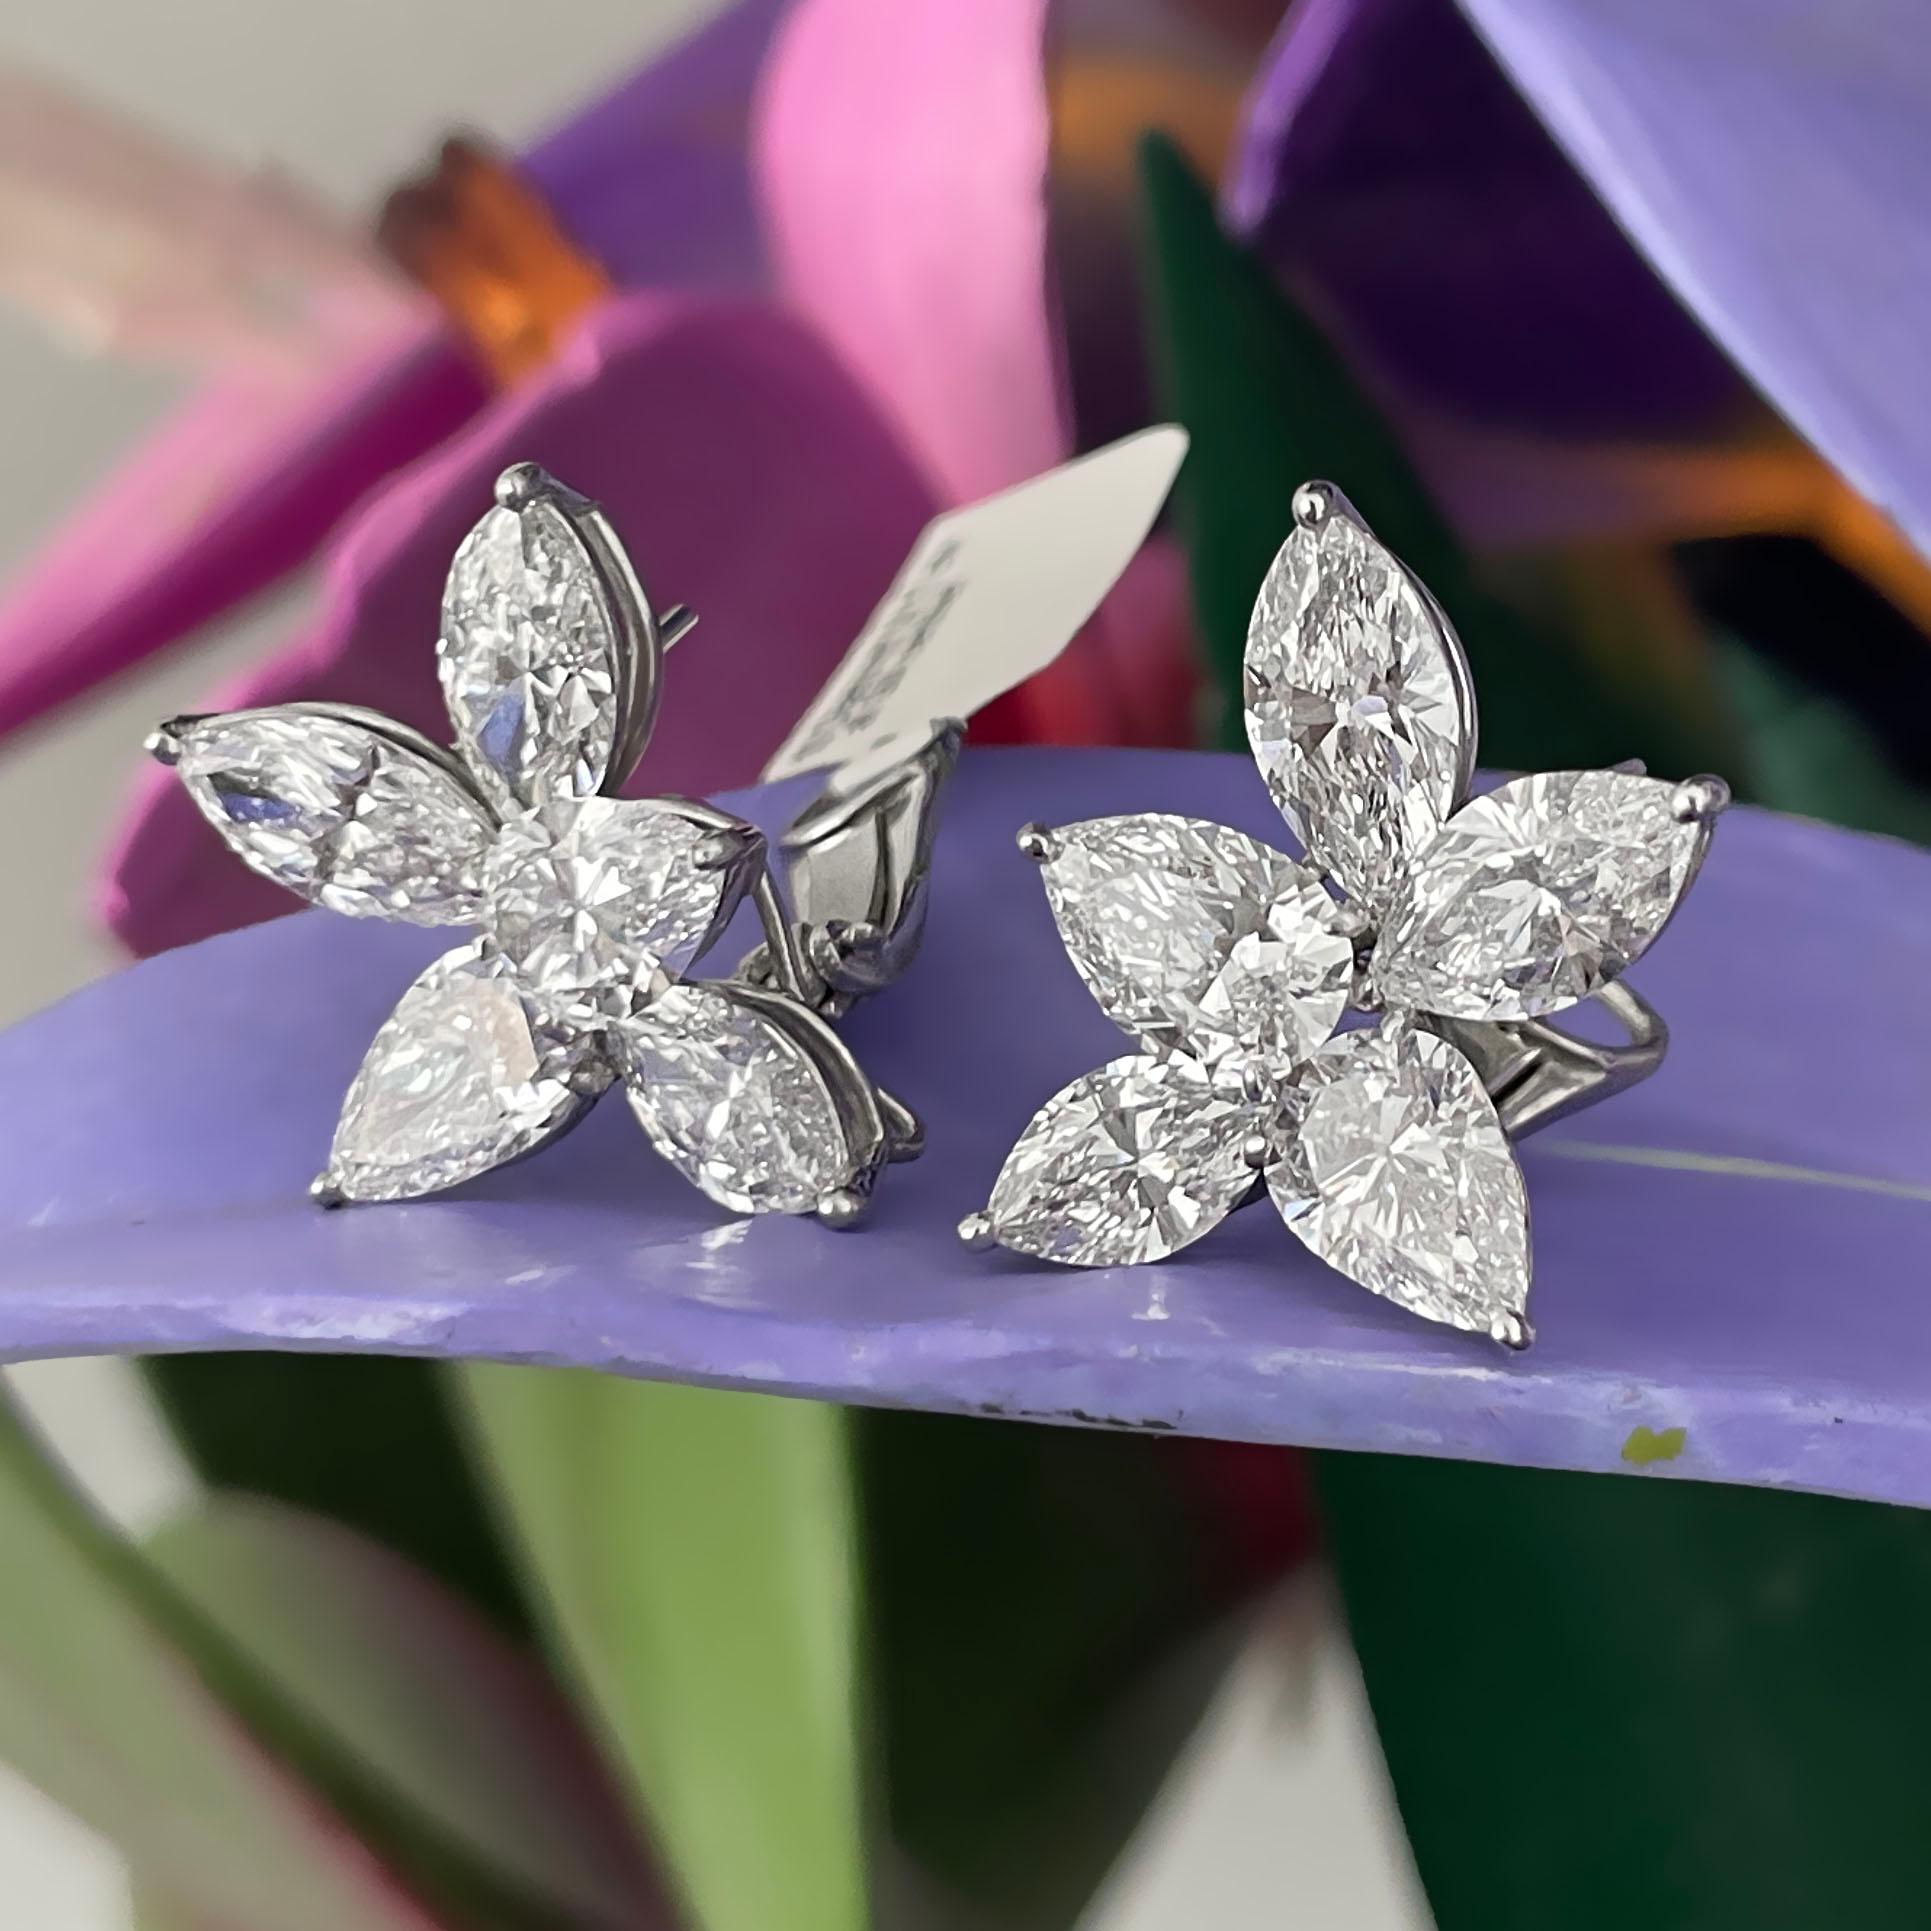 GIA certified platinum lever back diamond cluster earrings made to perfection. The brilliance of these certified, D/ E/ F color diamonds are stunning. The clusters are made with 4 pear and 6 marquise shape diamonds and weigh 14.17 carats total.
All